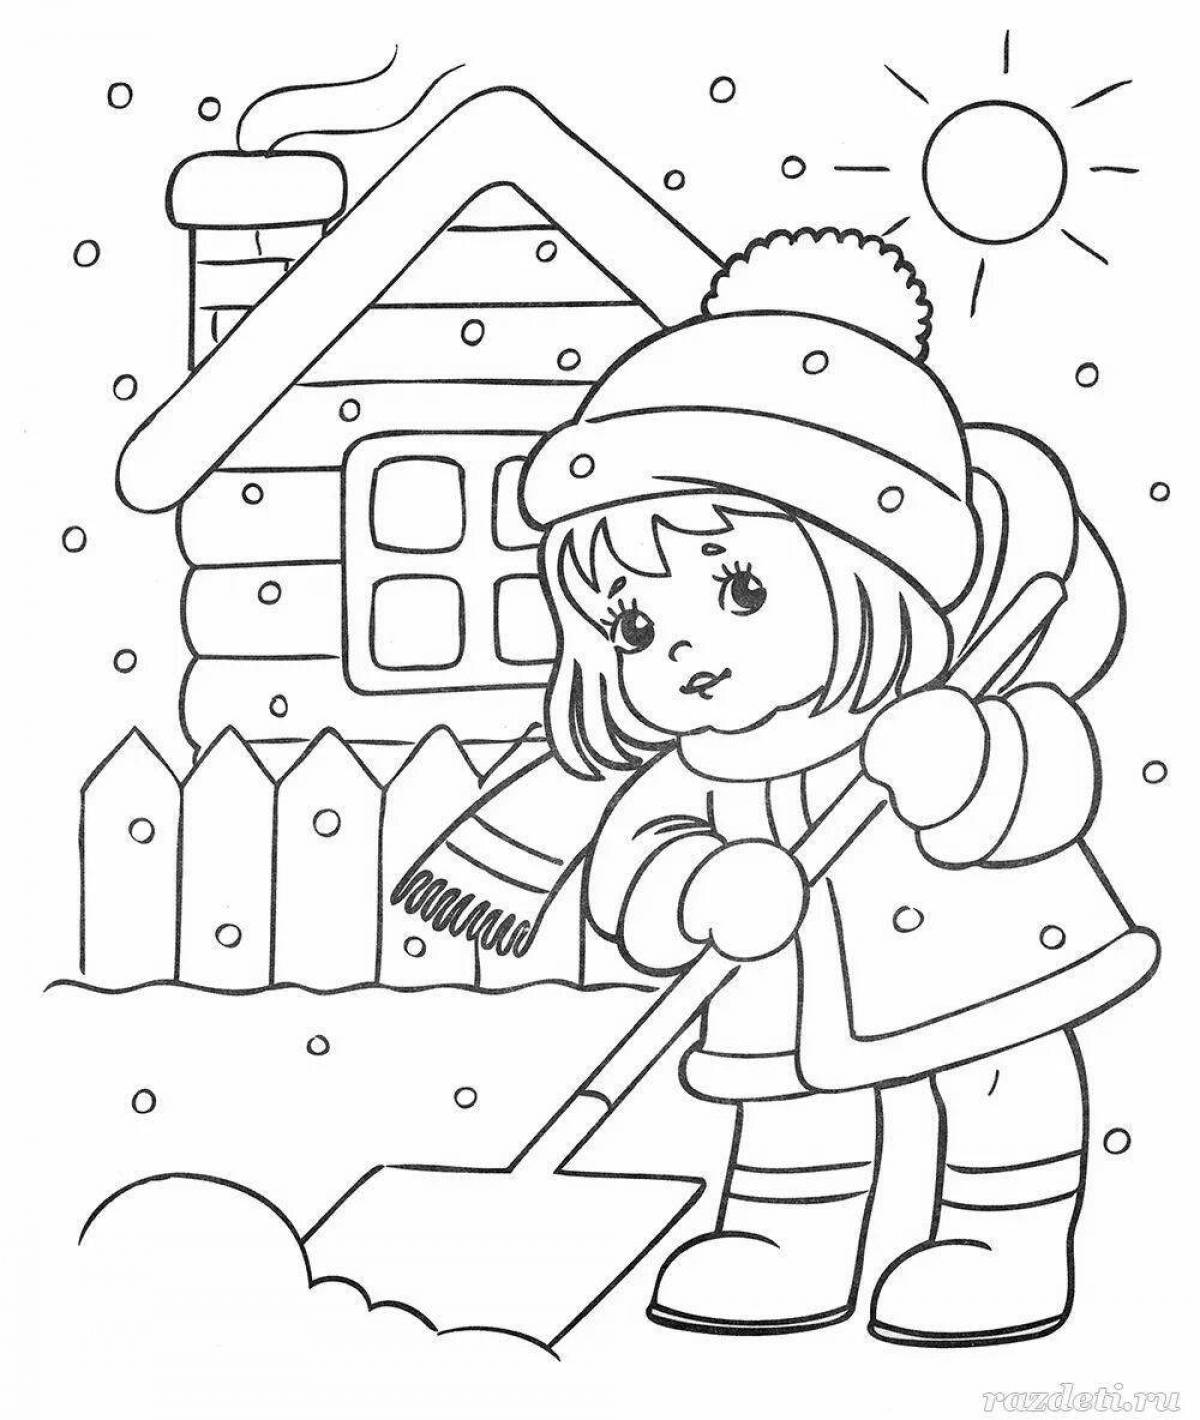 Incredible winter coloring book for kids 2-3 years old